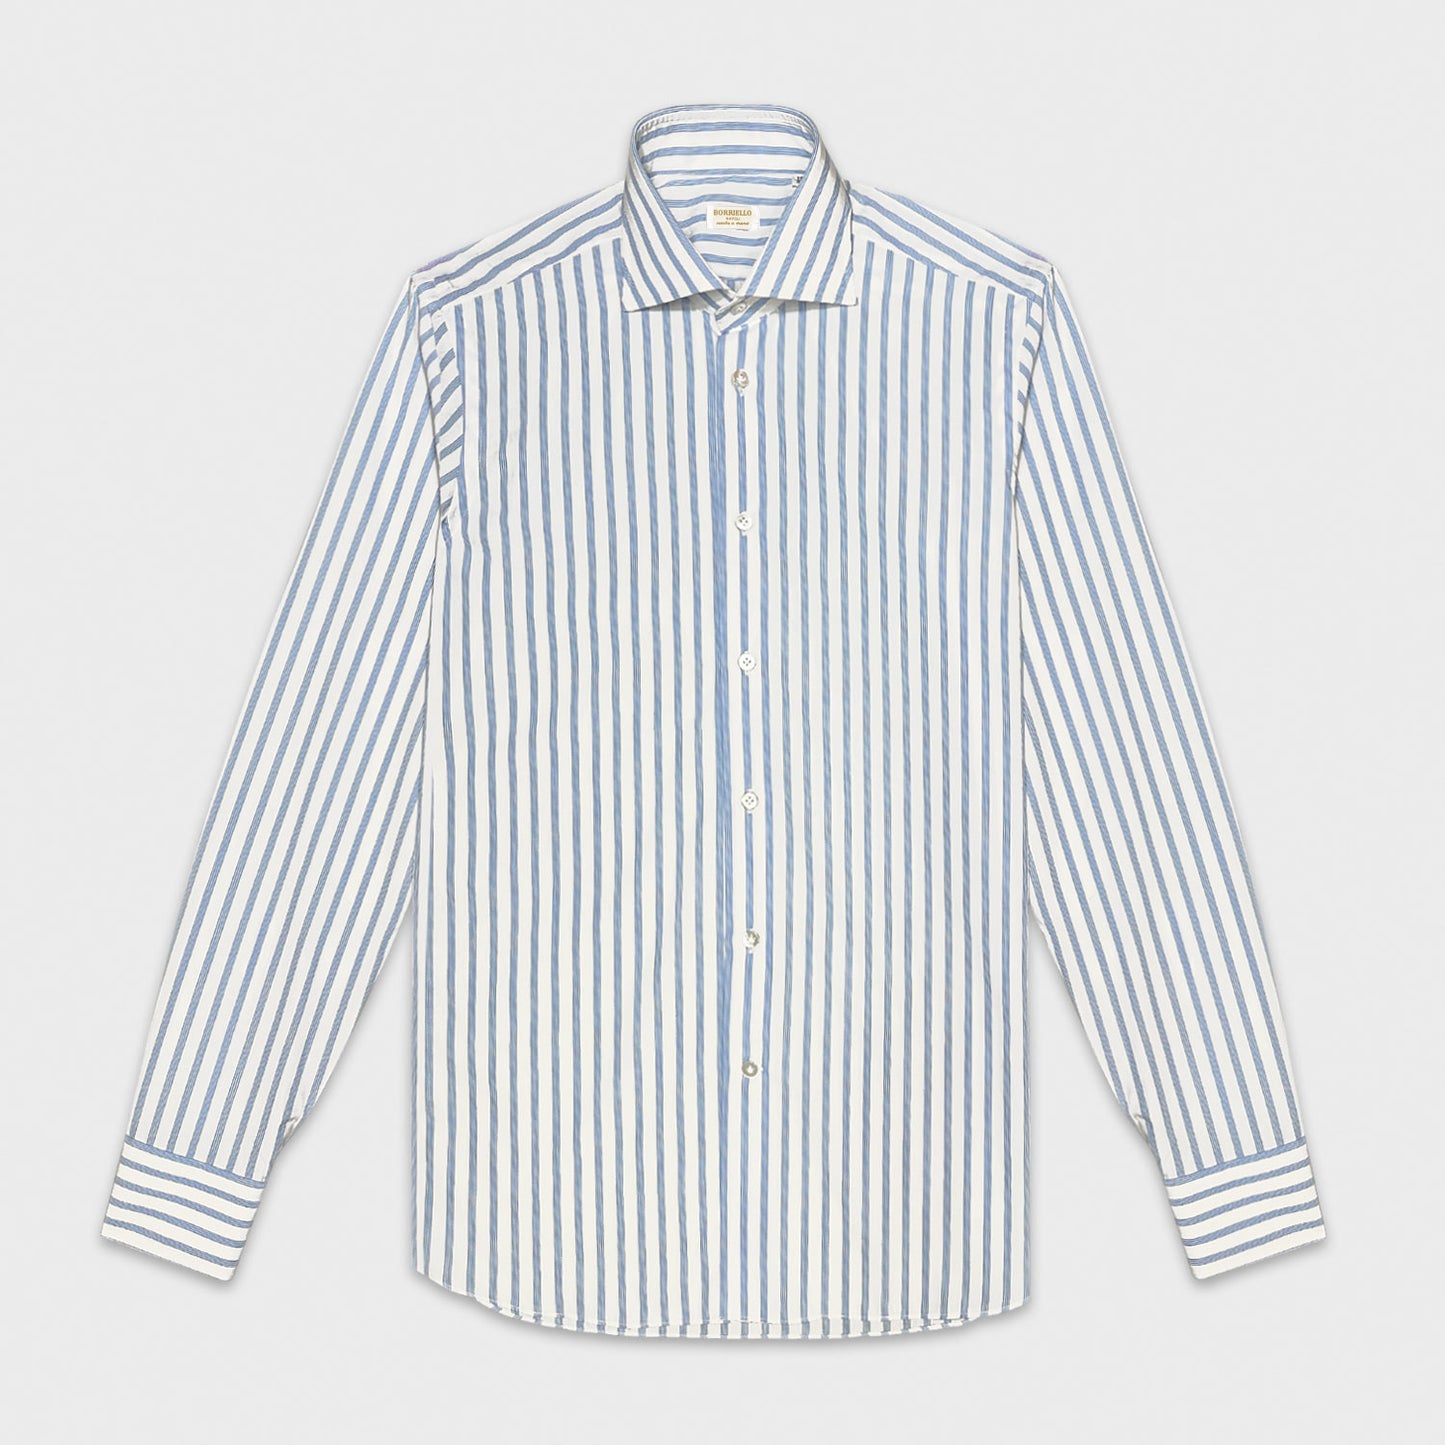 Sky blue classic striped shirt, handmade by Borriello Napoli exclusive for Wools Boutique Uomo with a refined yarn-dyed fabric in 100% popeline cotton, easy to match with many classic ties and jackets, timeless shirt for the office and for more formal occasions.